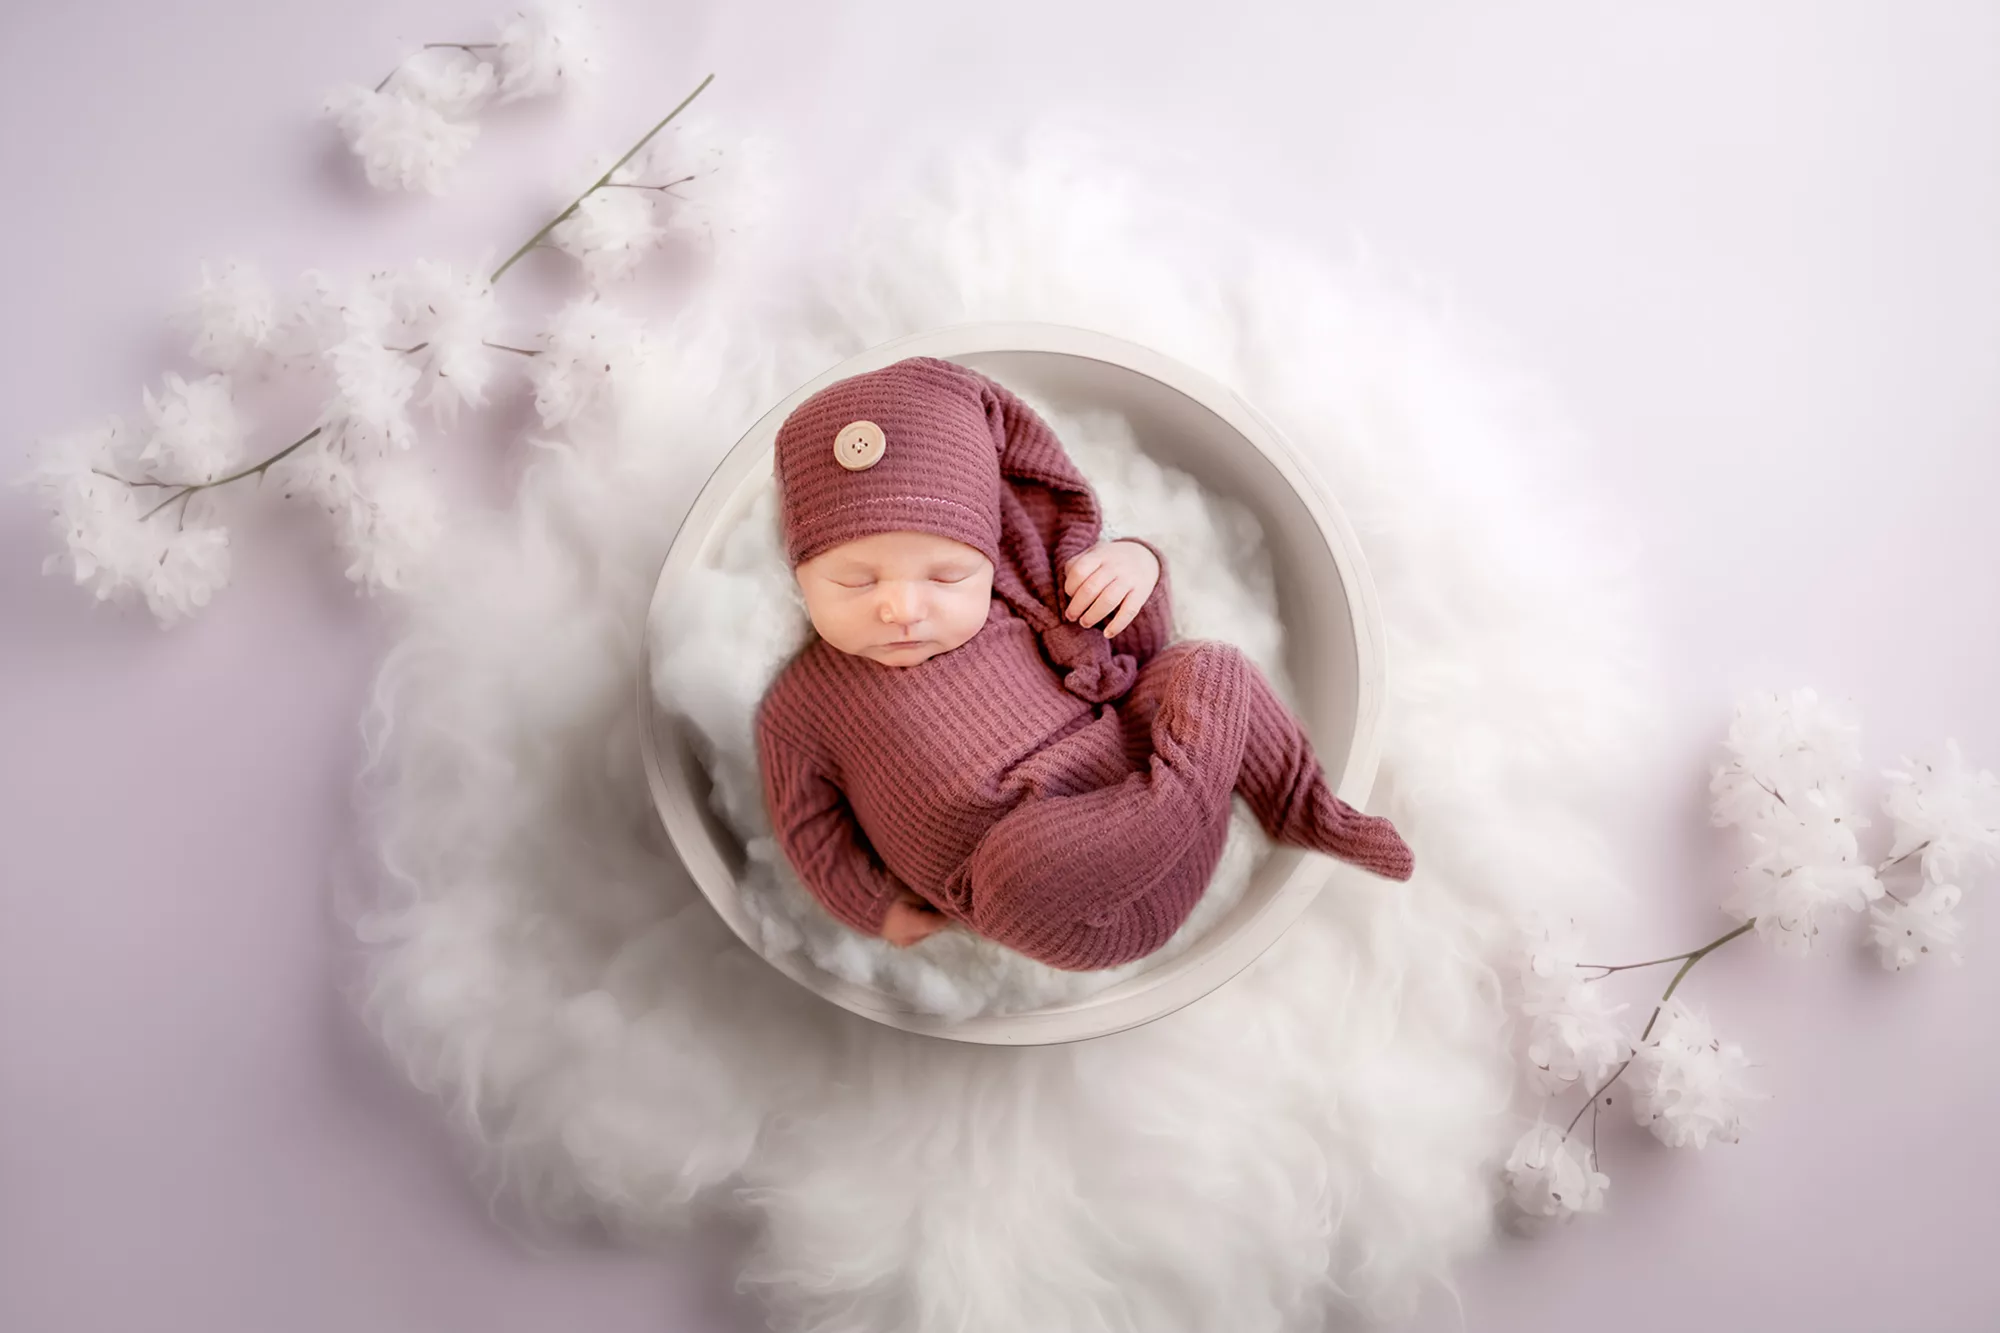 Newborn Girl Photography in a pink outfit laying in a bowl of white fluff on a white rug and pink background